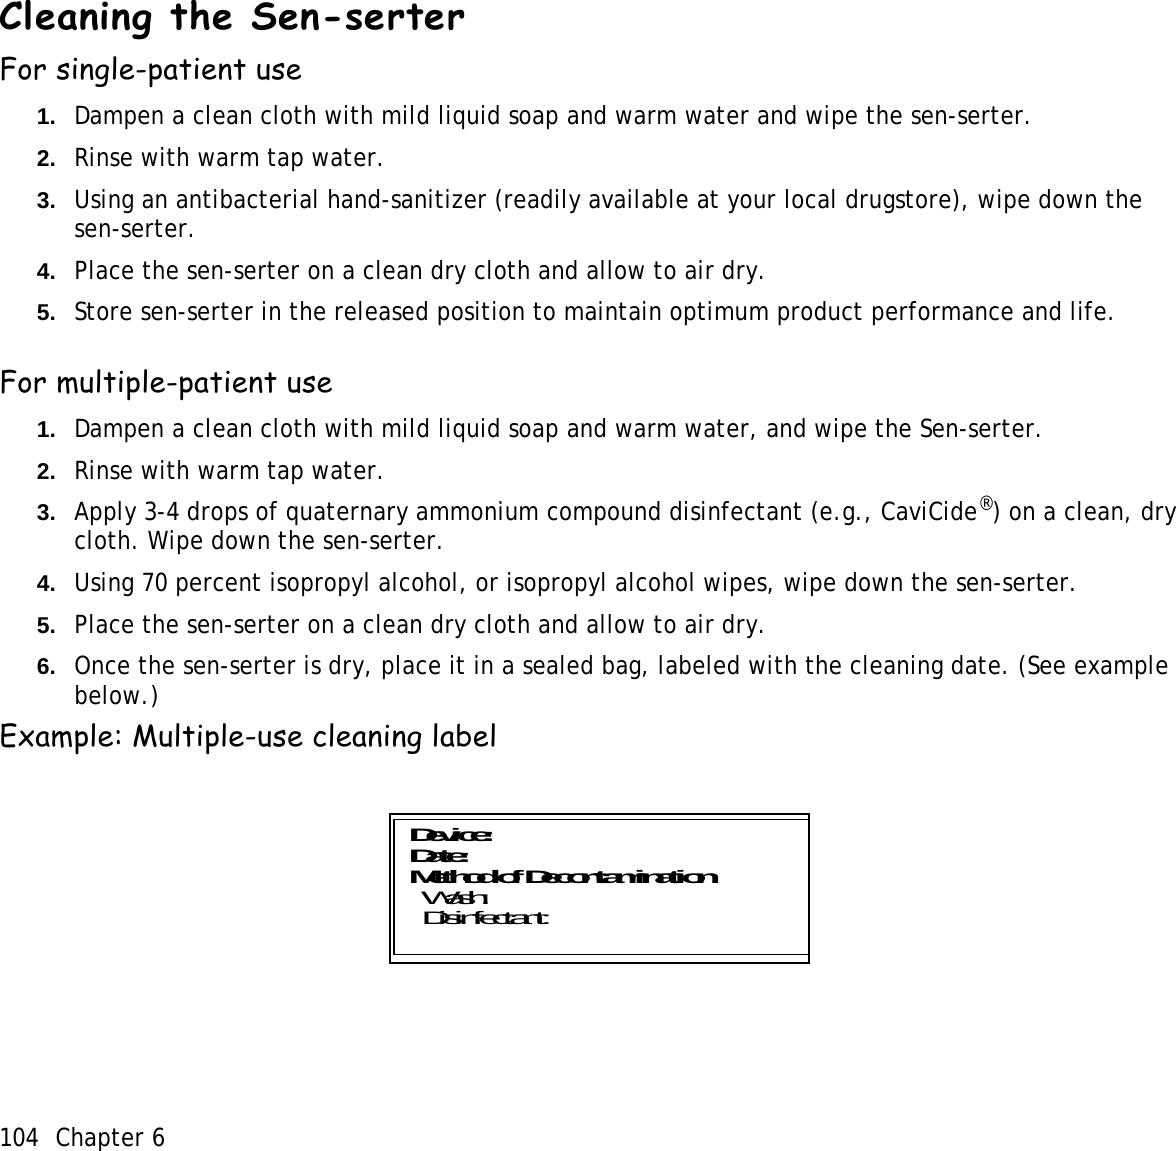 104 Chapter 6 Cleaning the Sen-serterFor single-patient use1. Dampen a clean cloth with mild liquid soap and warm water and wipe the sen-serter.2. Rinse with warm tap water.3. Using an antibacterial hand-sanitizer (readily available at your local drugstore), wipe down the sen-serter.4. Place the sen-serter on a clean dry cloth and allow to air dry.5. Store sen-serter in the released position to maintain optimum product performance and life.For multiple-patient use1. Dampen a clean cloth with mild liquid soap and warm water, and wipe the Sen-serter.2. Rinse with warm tap water.3. Apply 3-4 drops of quaternary ammonium compound disinfectant (e.g., CaviCide®) on a clean, dry cloth. Wipe down the sen-serter.4. Using 70 percent isopropyl alcohol, or isopropyl alcohol wipes, wipe down the sen-serter.5. Place the sen-serter on a clean dry cloth and allow to air dry.6. Once the sen-serter is dry, place it in a sealed bag, labeled with the cleaning date. (See example below.)Example: Multiple-use cleaning labelDevice:Date: Method of Decontamination   Wash:   Disinfectant: 